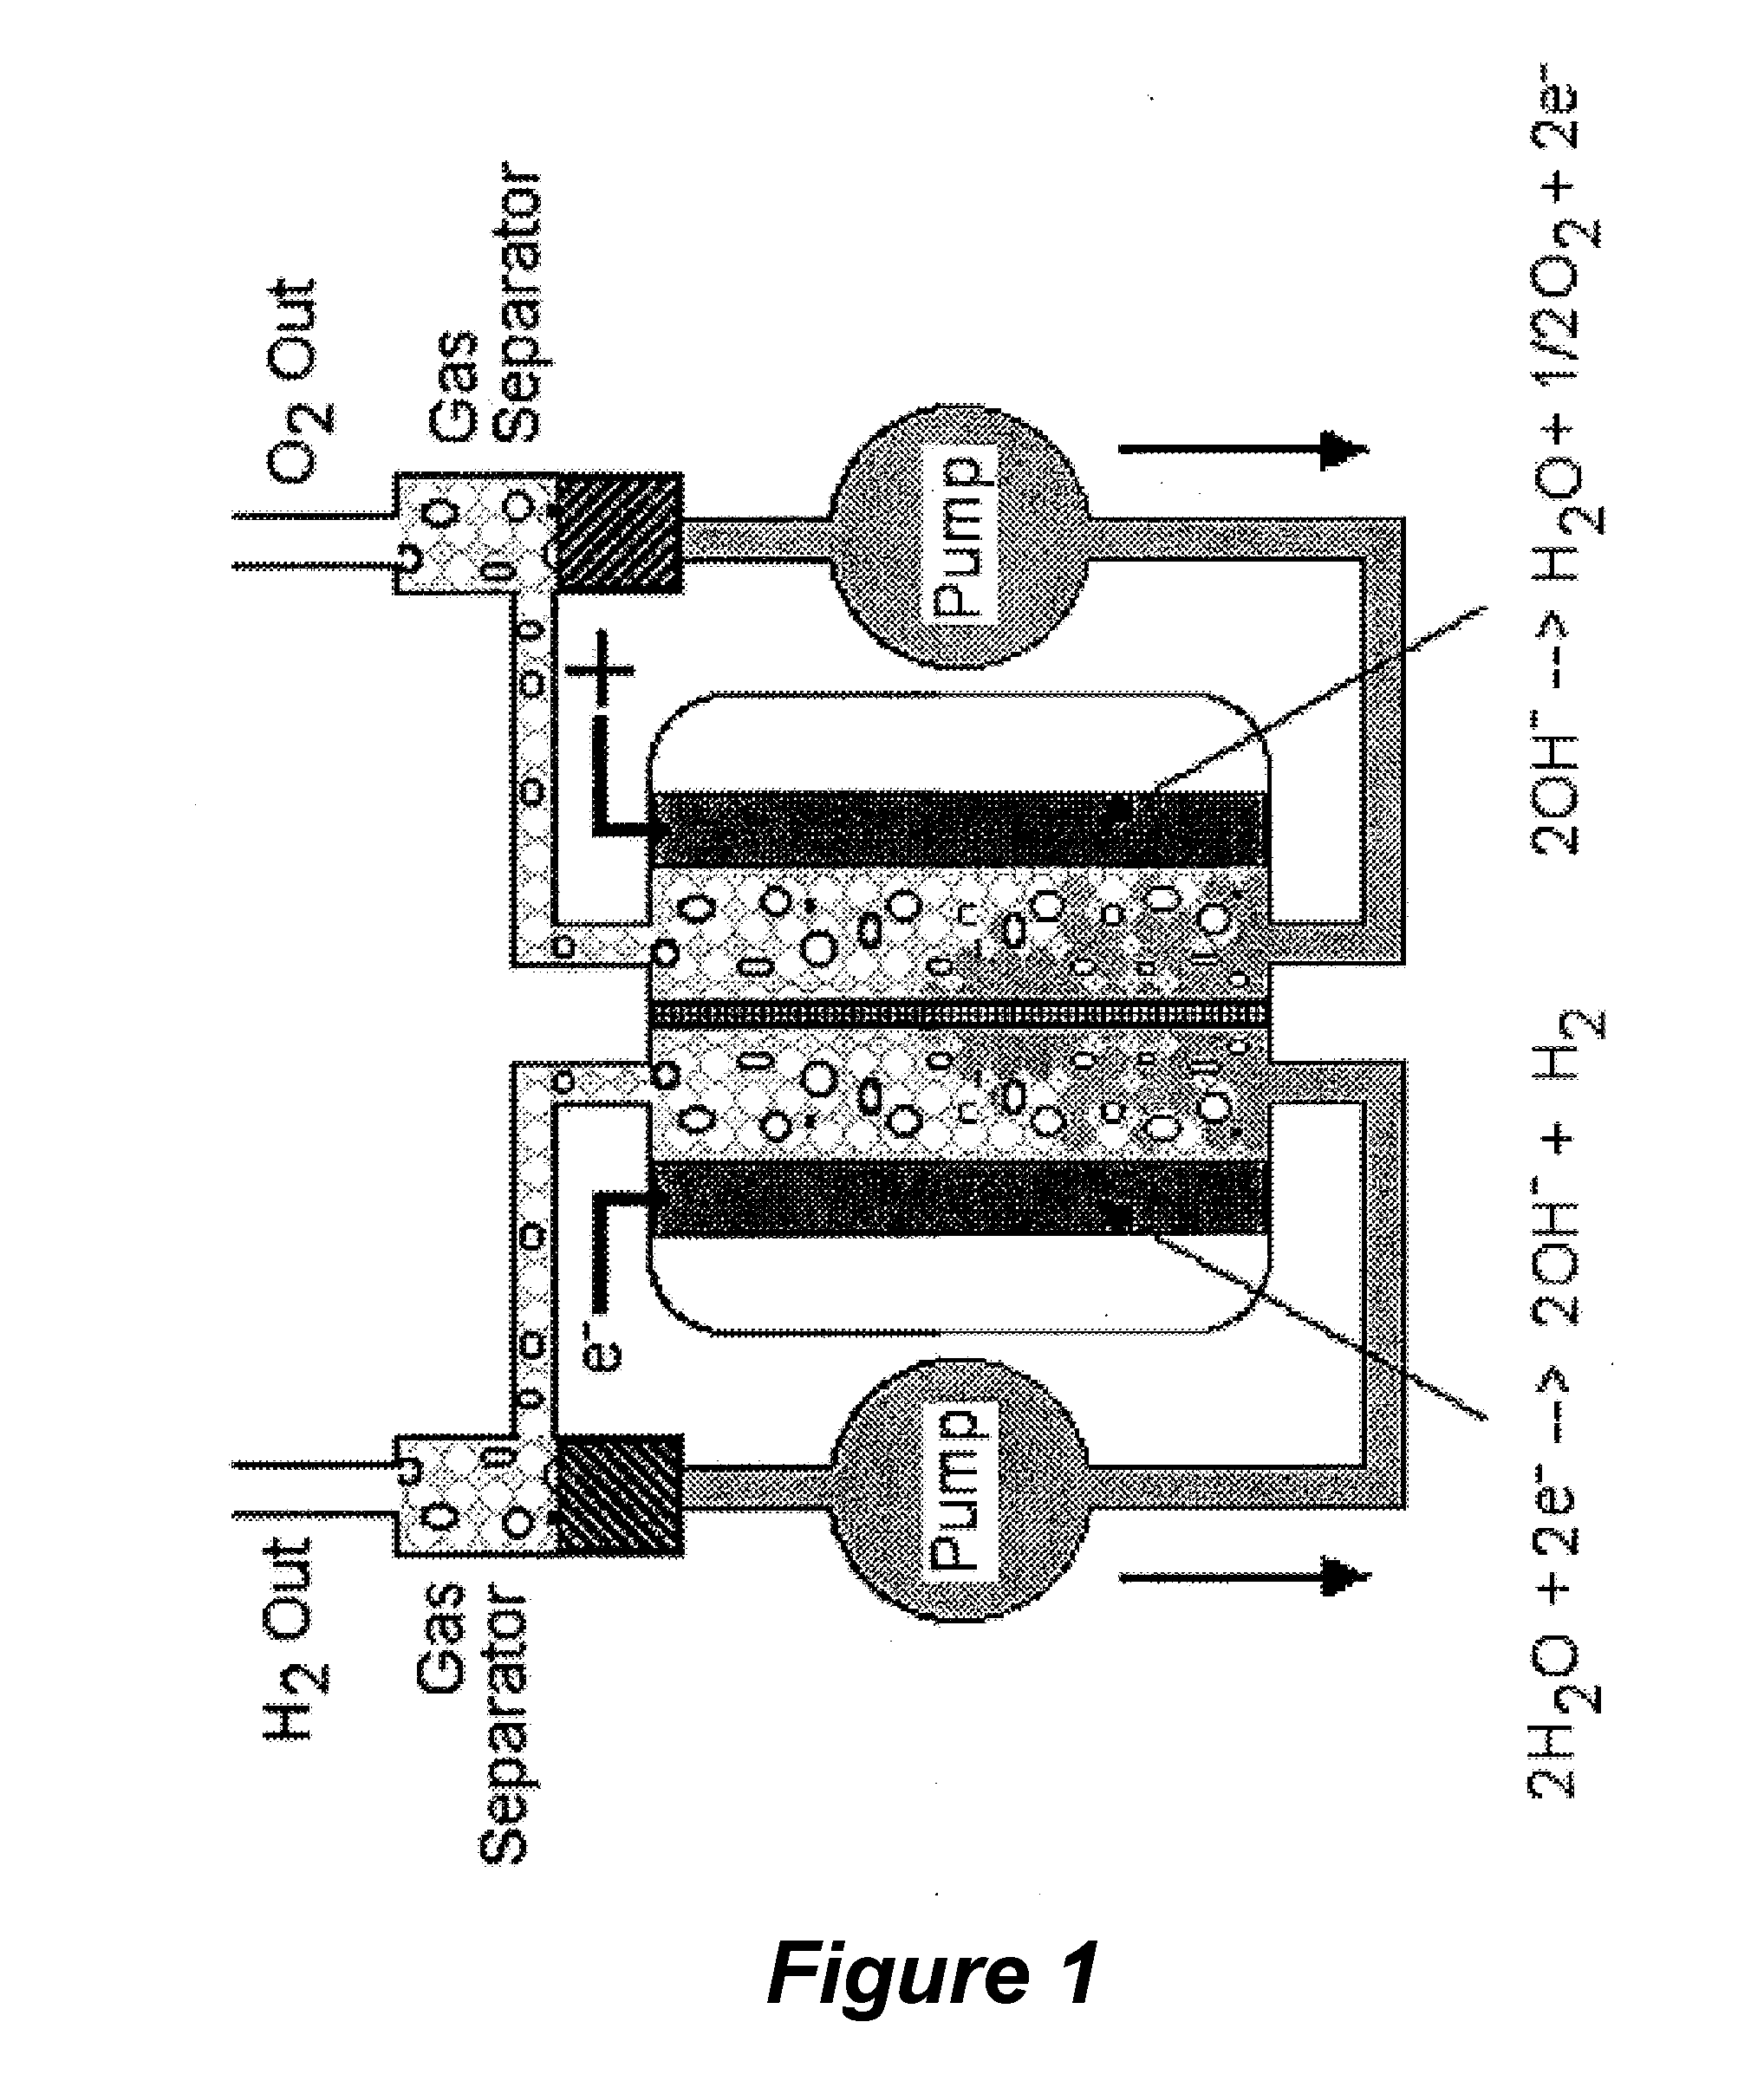 Device and method for photolysis-assisted electrolysis